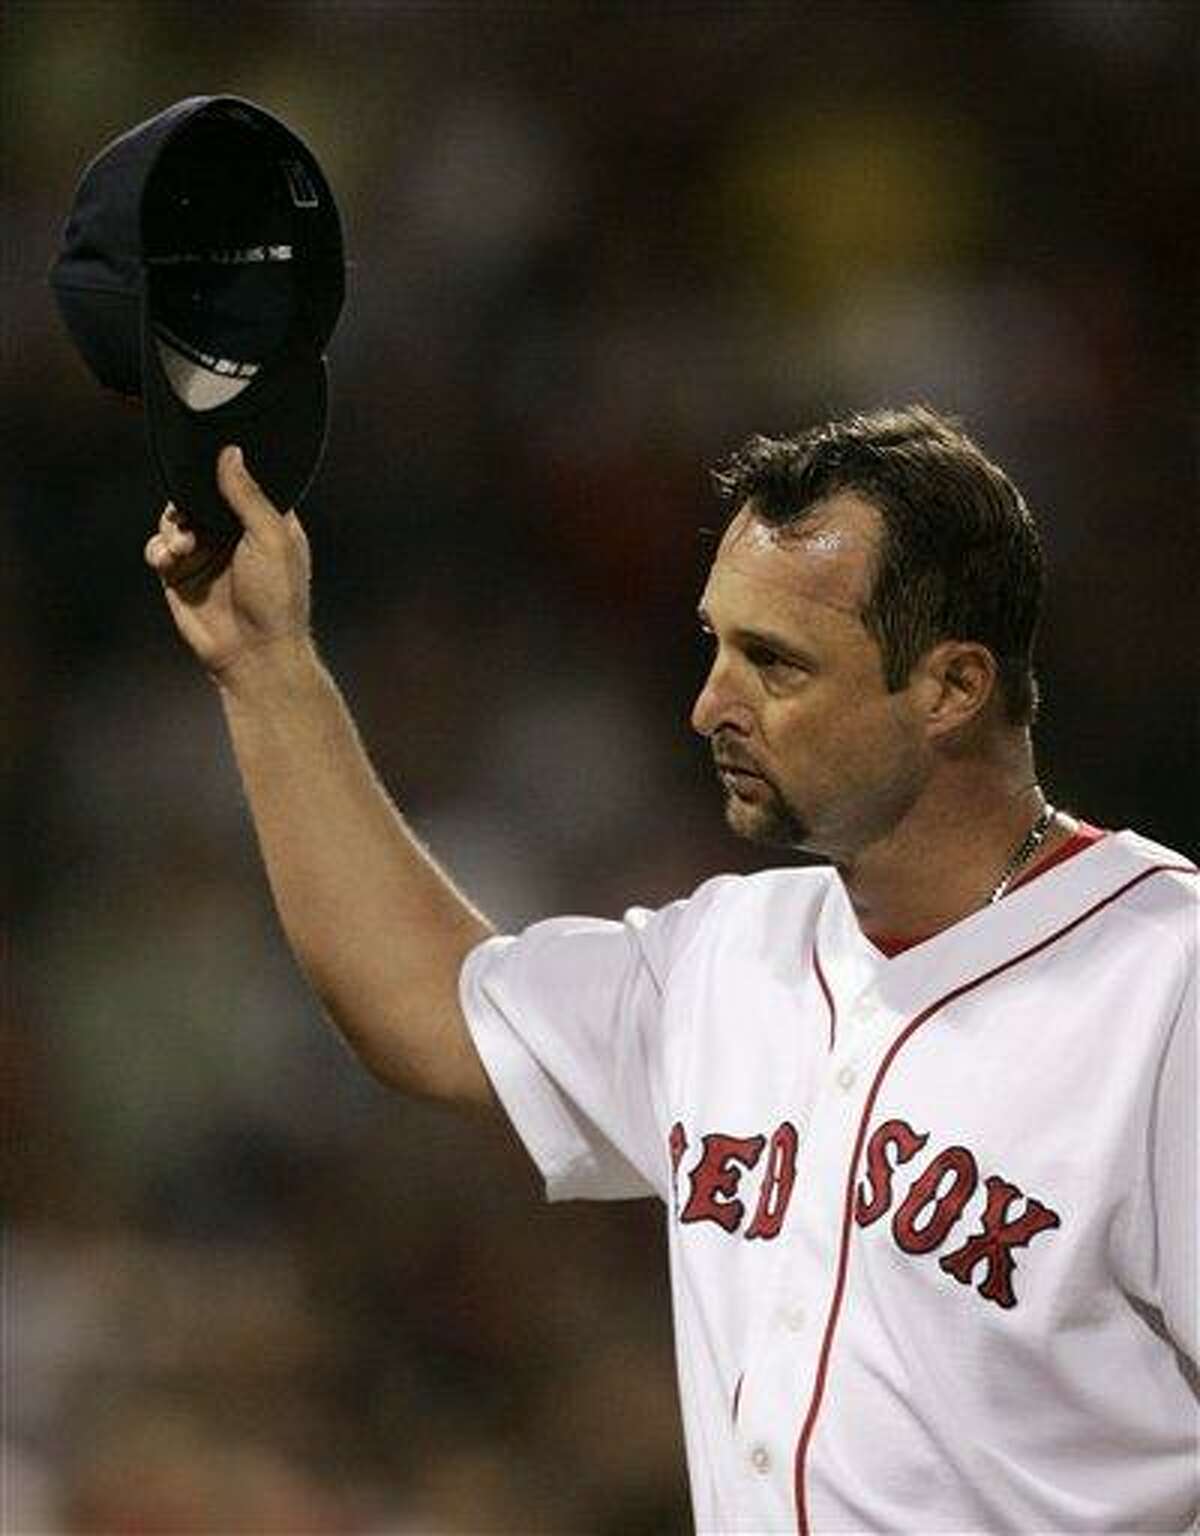 ** FILE ** Boston Red Sox starter Tim Wakefield tips his cap to the crowd while leaving in the seventh inning leading 2-1 against the Texas Rangers during their baseball game at Fenway Park in Boston, in this June 29, 2007 file photo. (AP Photo/Charles Krupa)